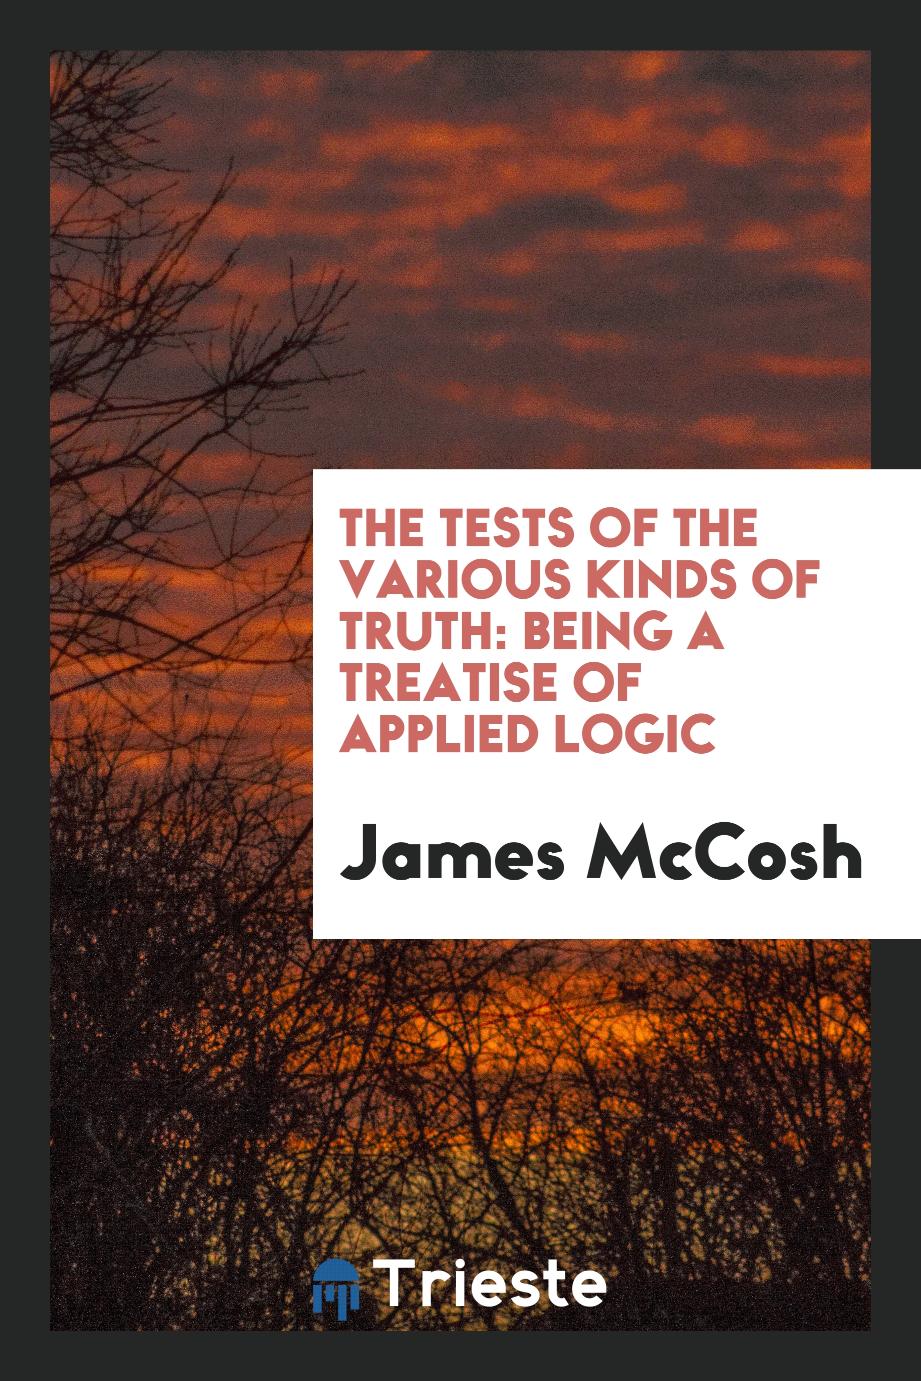 The Tests of the Various Kinds of Truth: Being a Treatise of Applied Logic